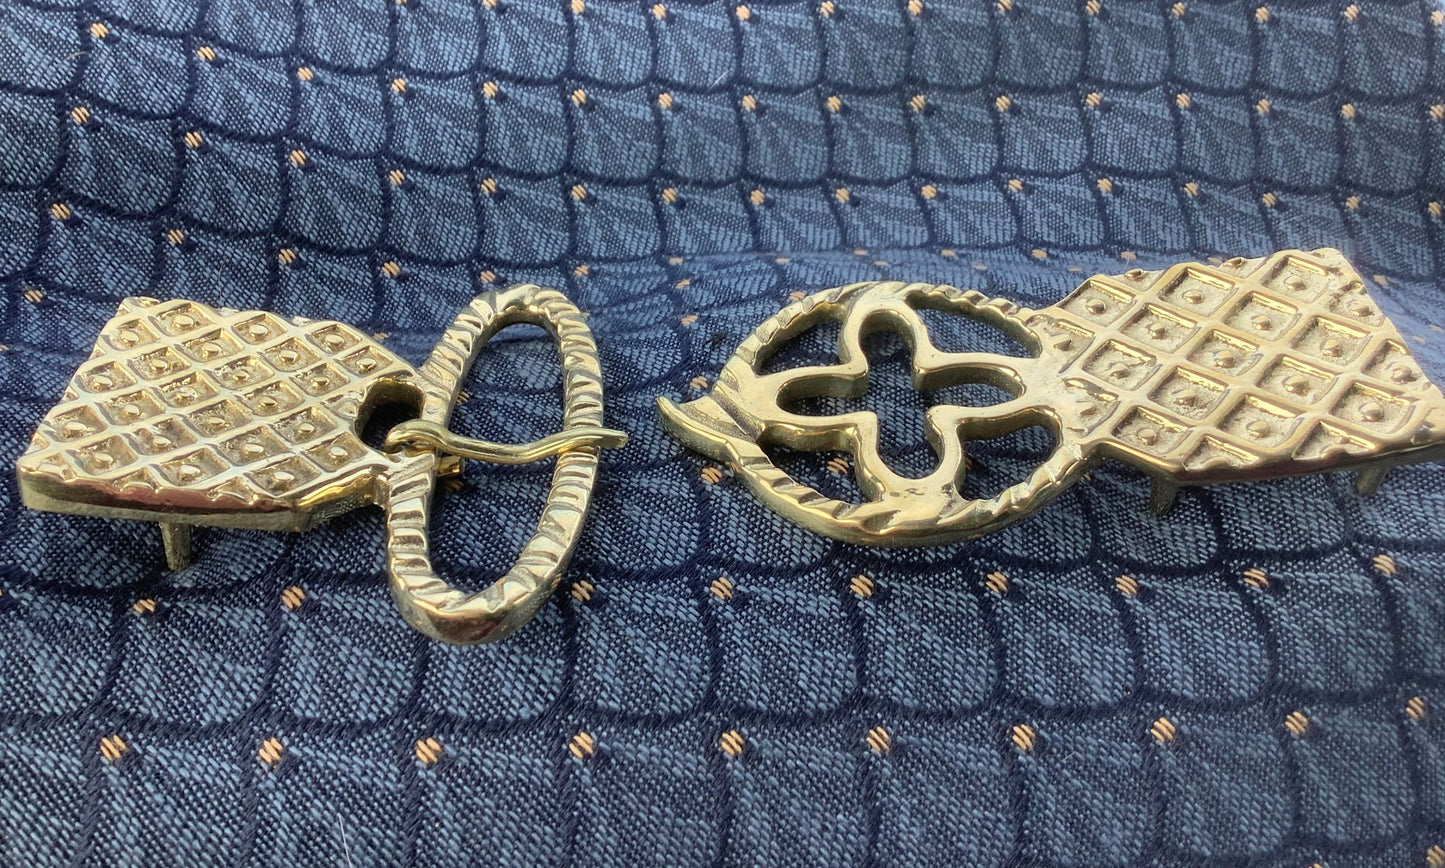 Medieval Buckle and strap-end set - 2 pieces